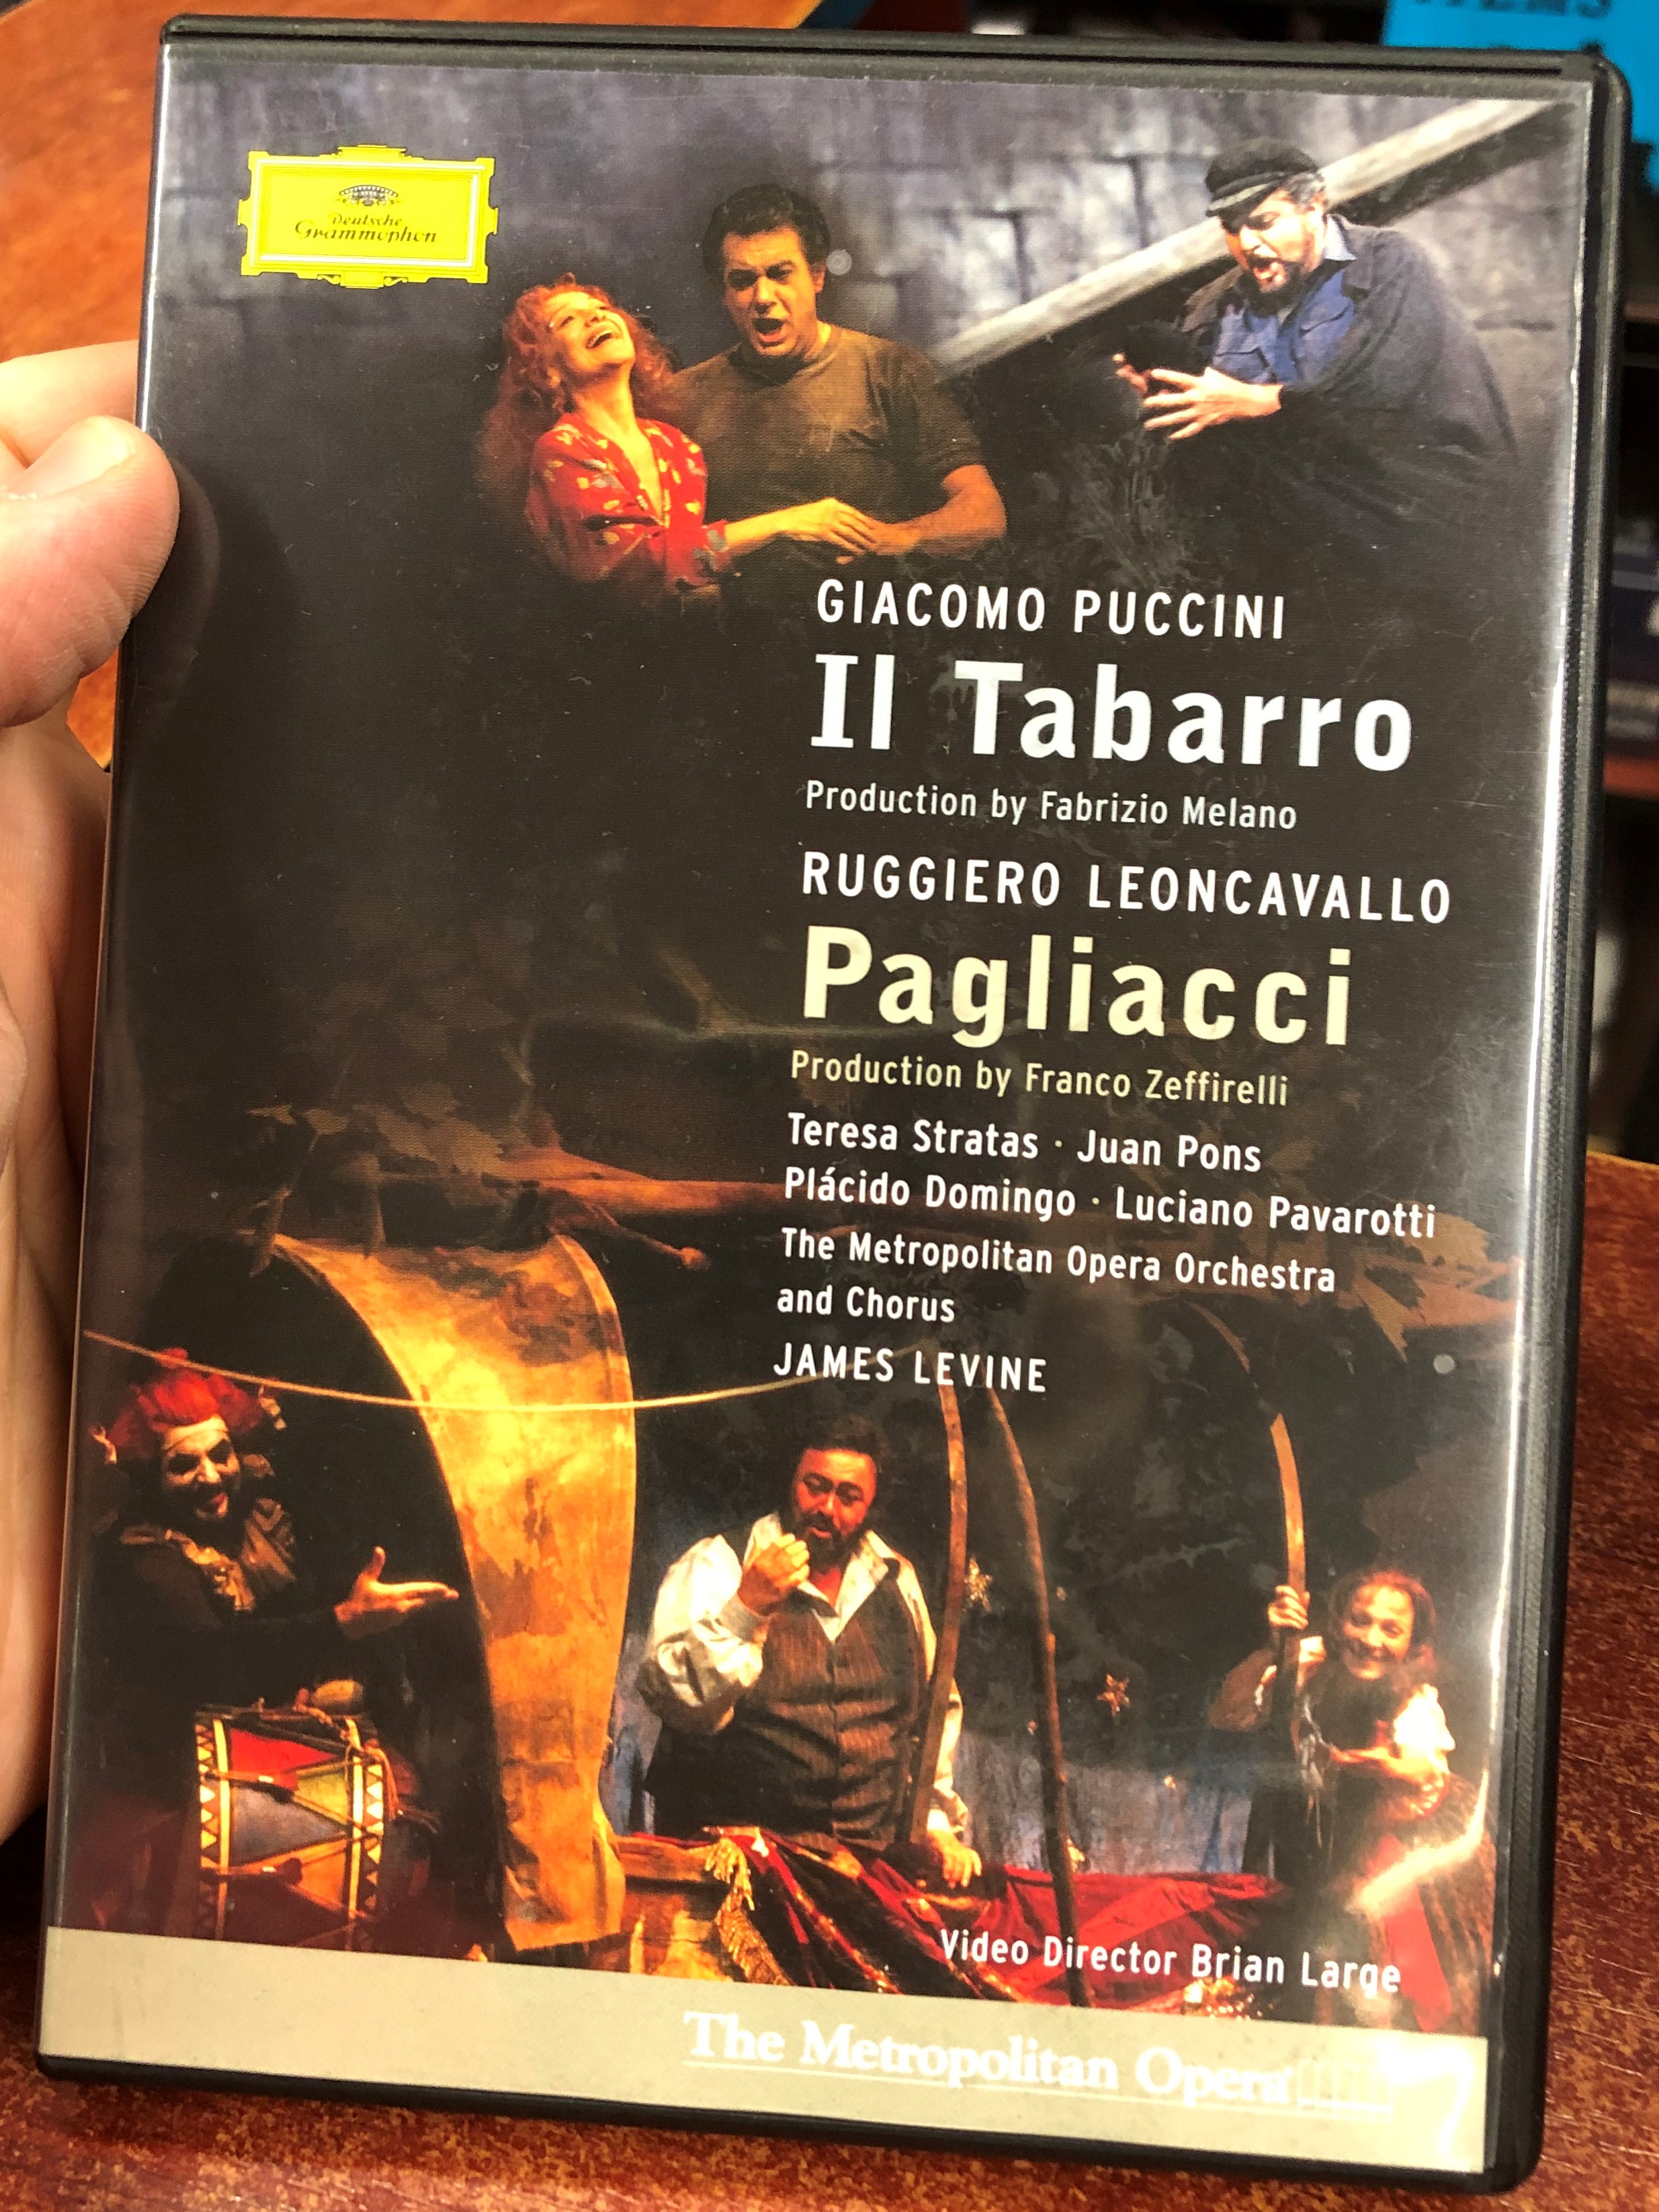 Il Tabarro - Pagliacci DVD 2005 / Directed by Brian Large / The  Metropolitan Opera Orchestra and Chorus / Conducted by James Levine /  Produced by Fabrizio Melano, Franco Zeffirelli / Deutsche Grammophon -  bibleinmylanguage